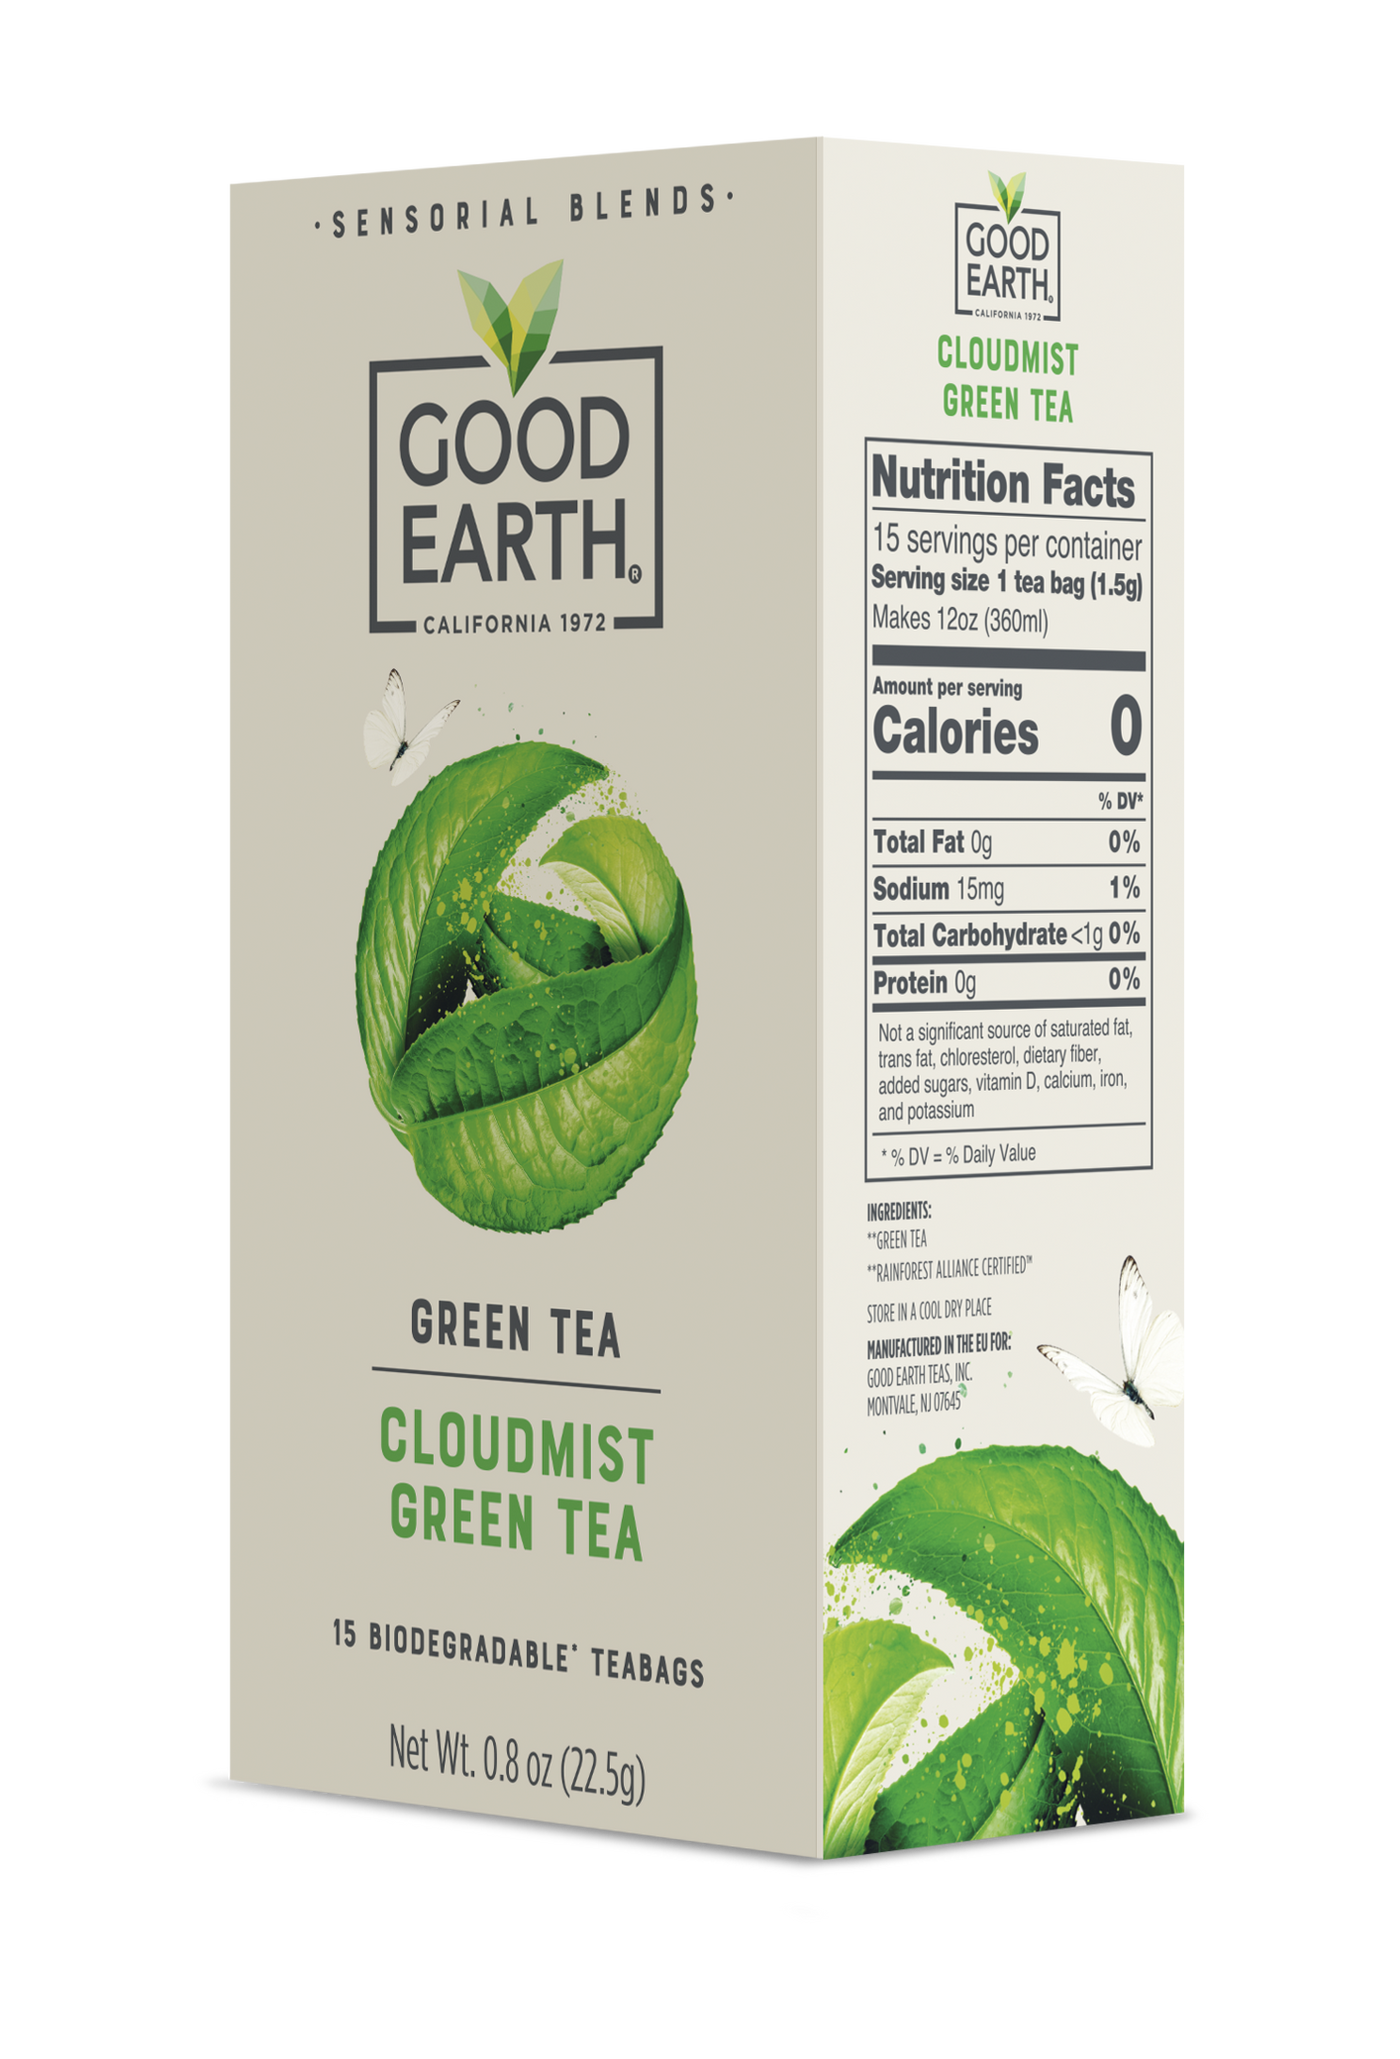 Cloudmist Green Nutrition Facts see below